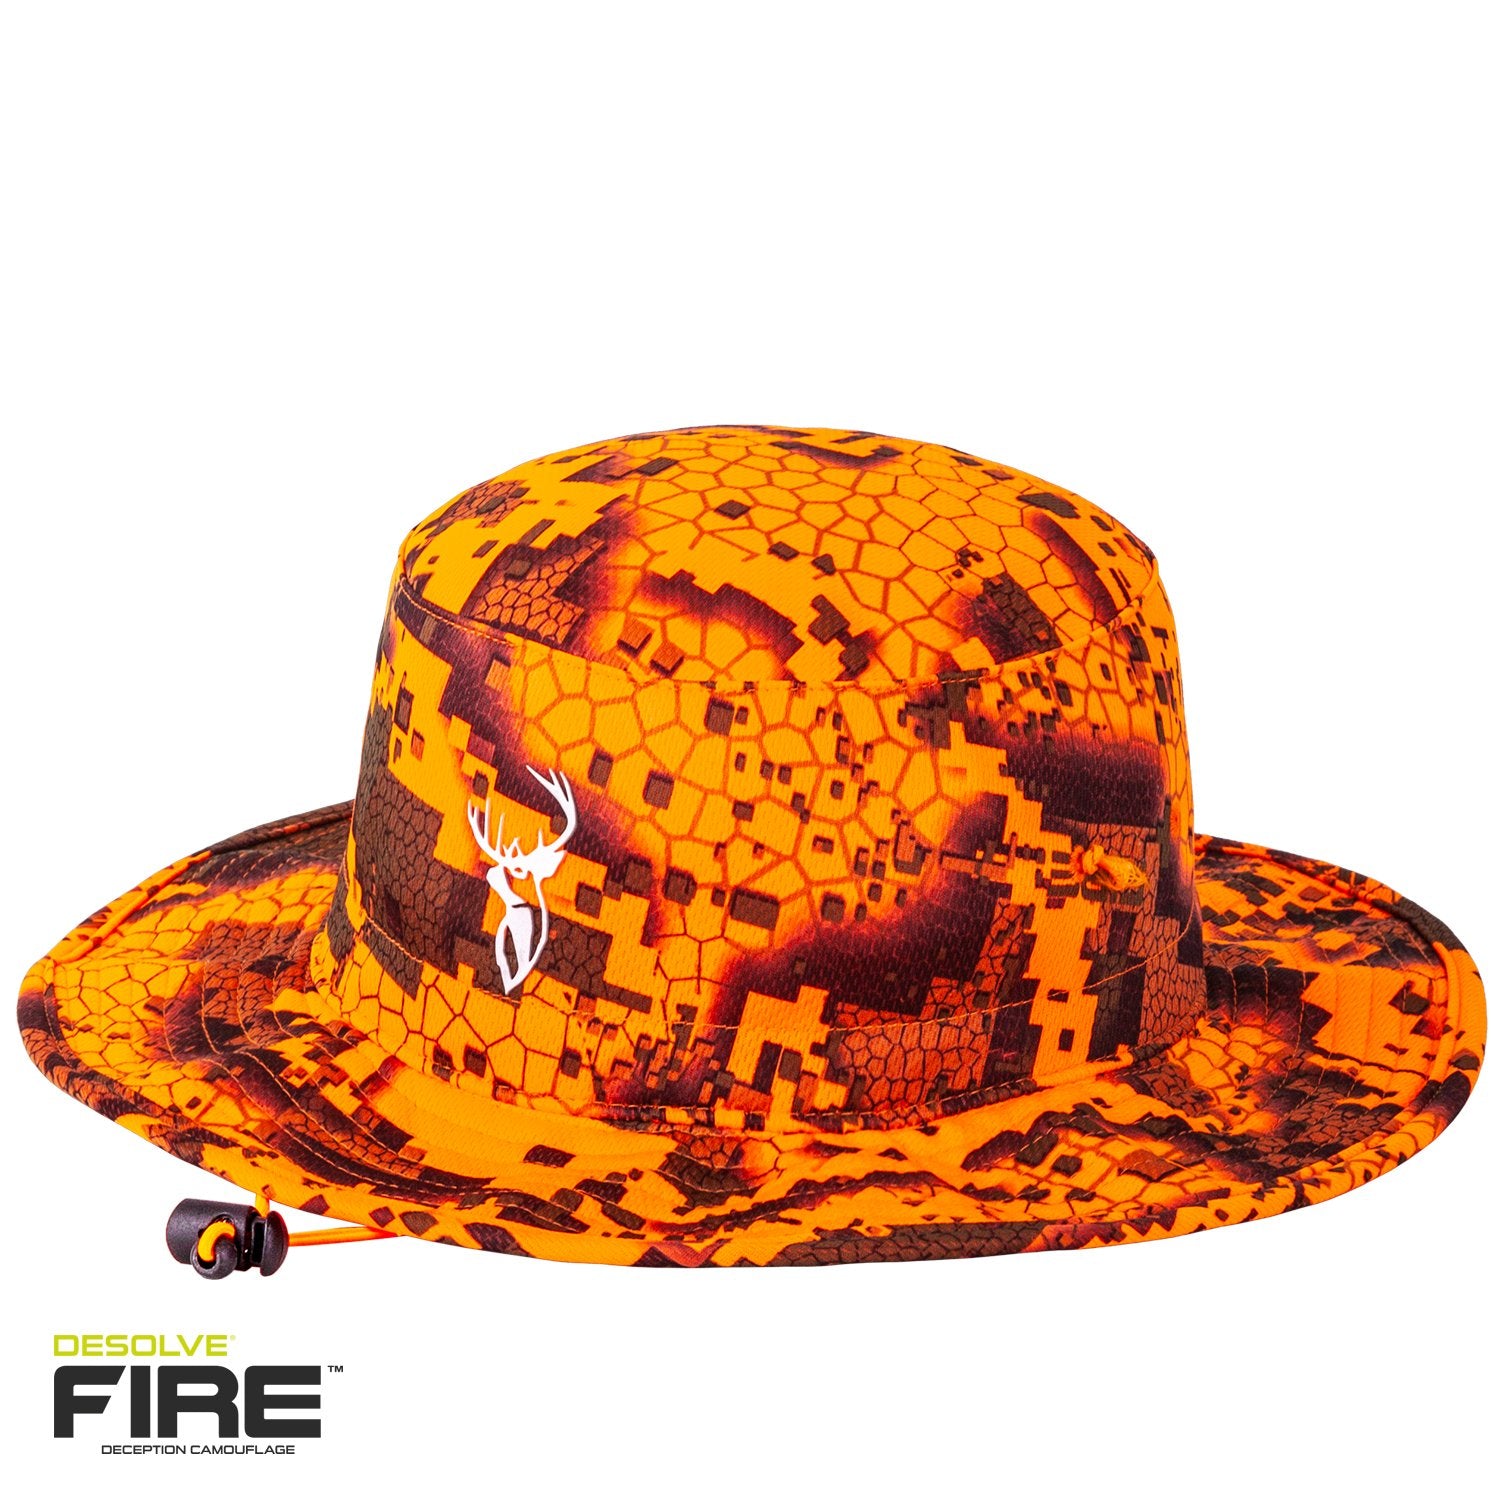 Hunters Element Boonie Hat - Desolve Fire -  - Mansfield Hunting & Fishing - Products to prepare for Corona Virus